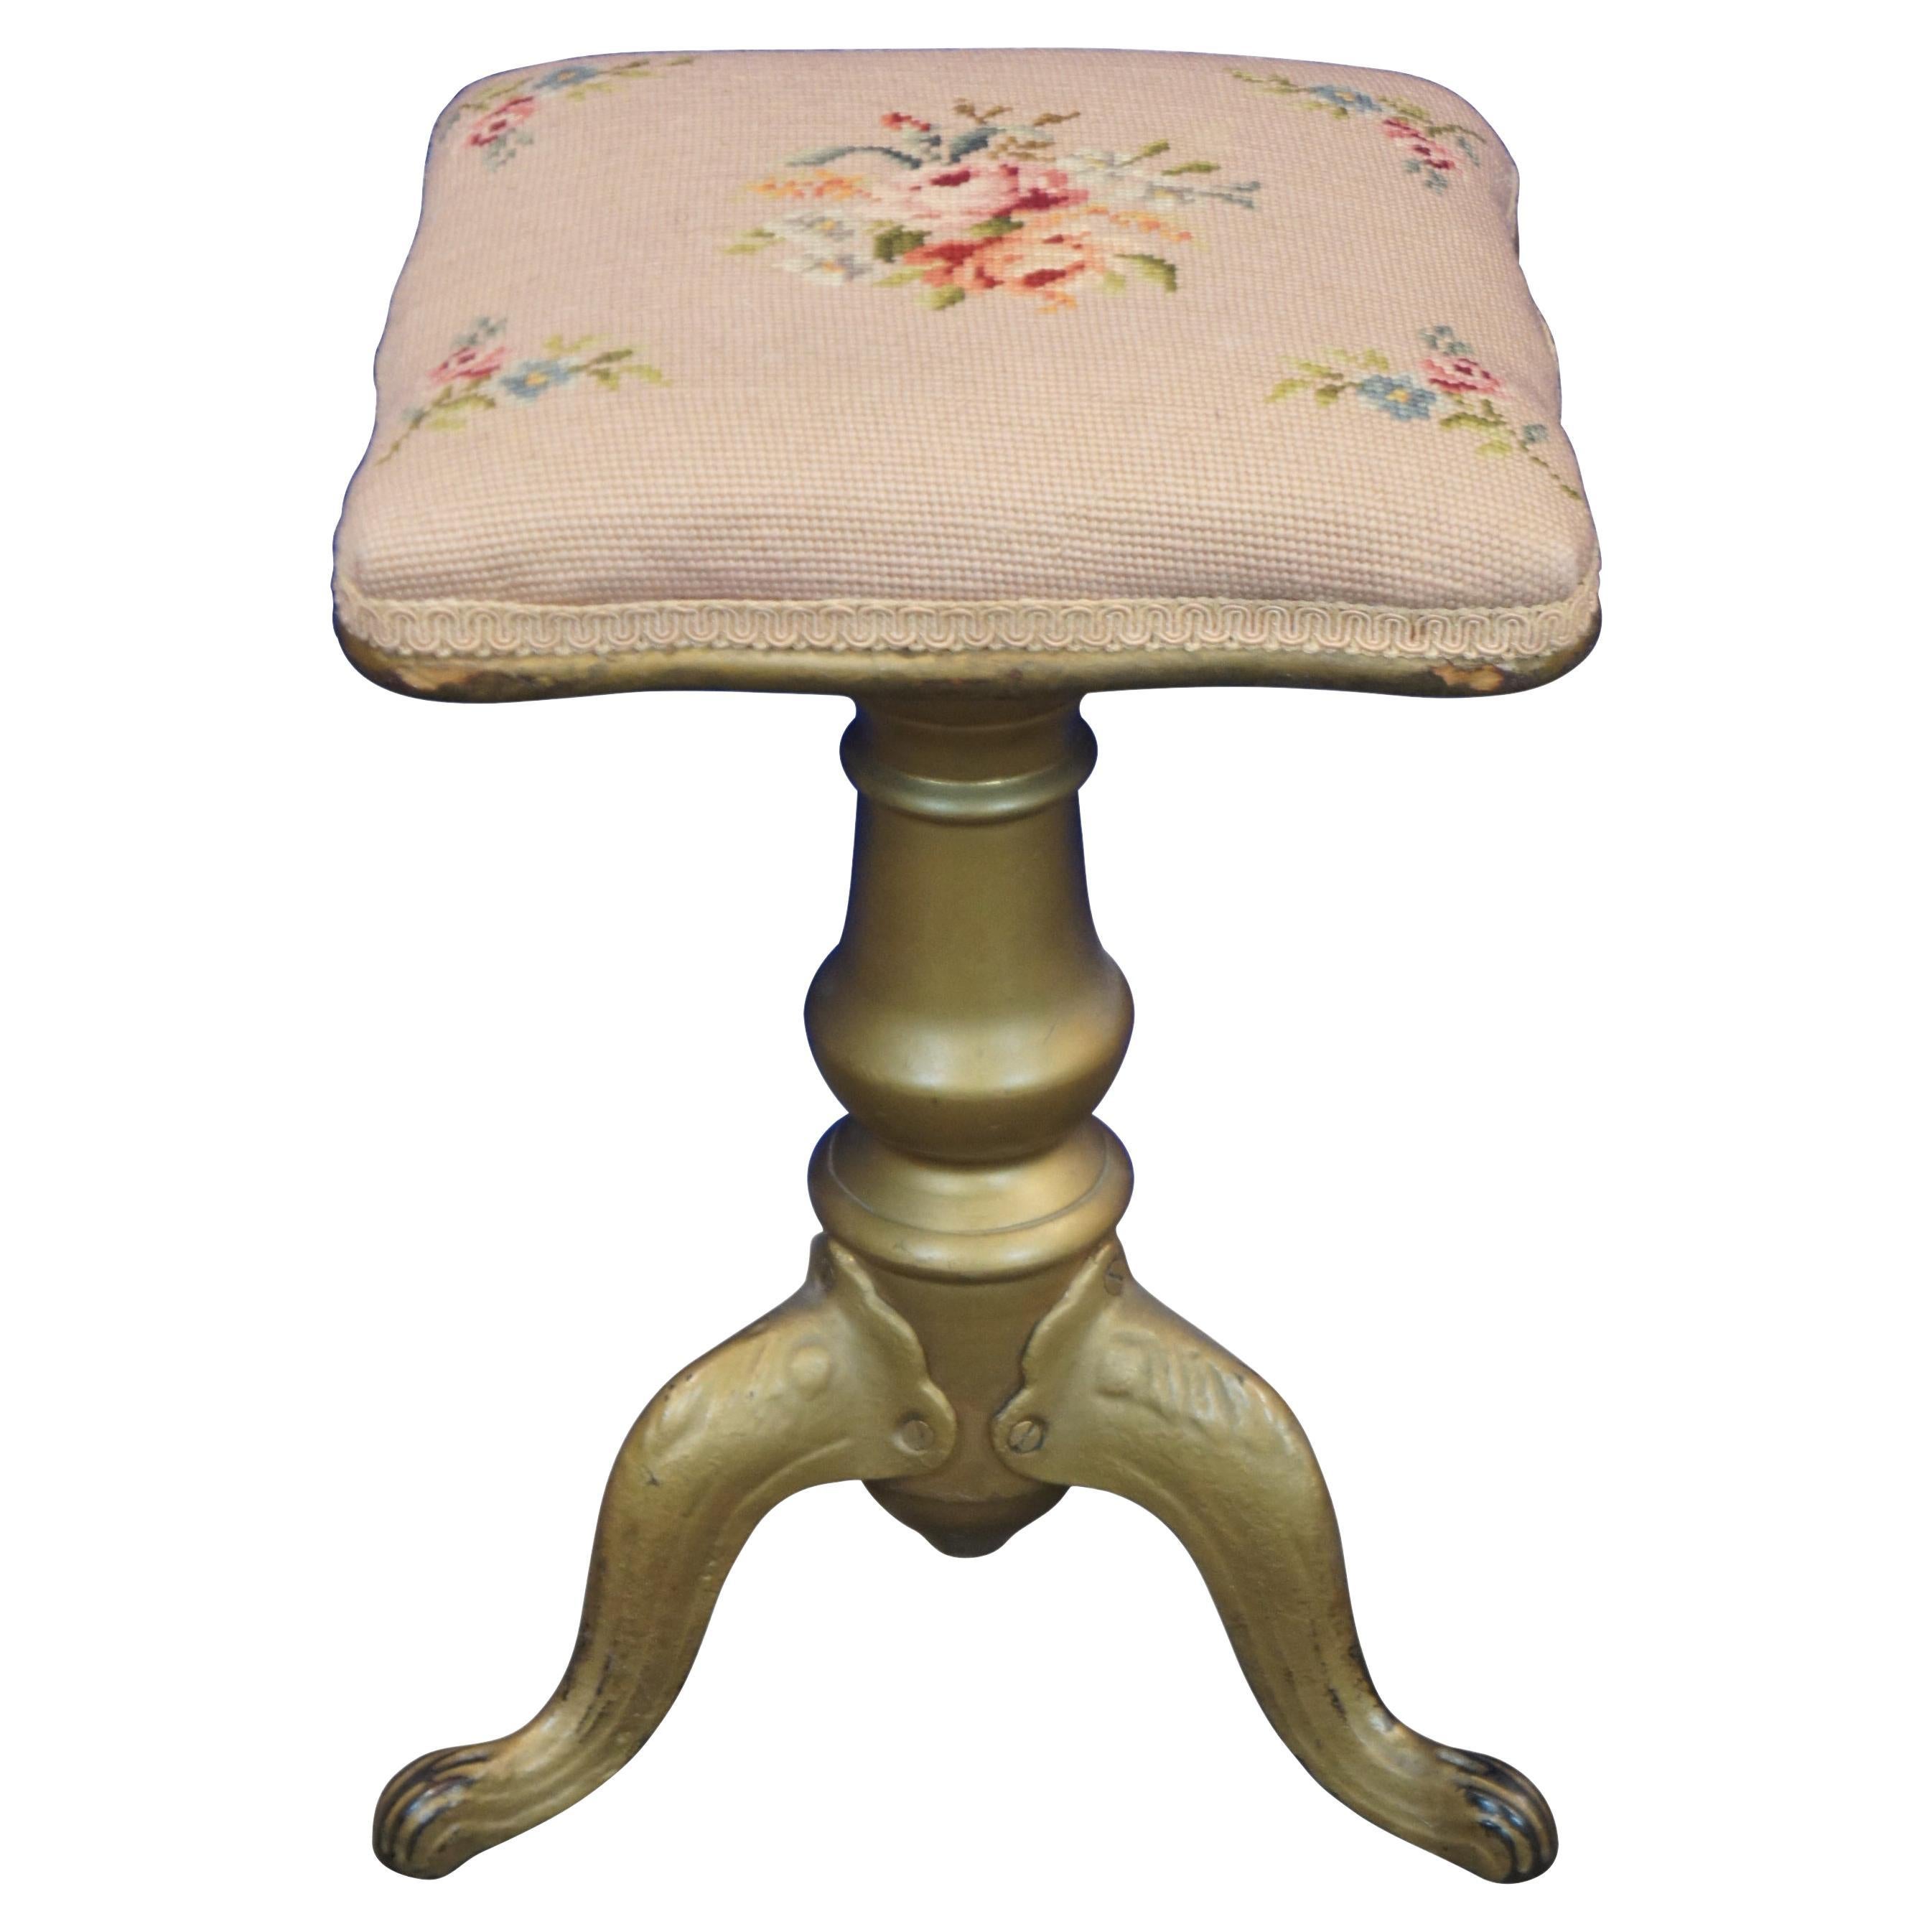 Antique Victorian piano stool with a wood and metal baluster shaped base with cabriole paw feet, painted gold, and a square adjustable height seat covered in pink floral needlepoint.

Measures: 12” x 12” x 22” / Lowest Height – 18.5” (Width x